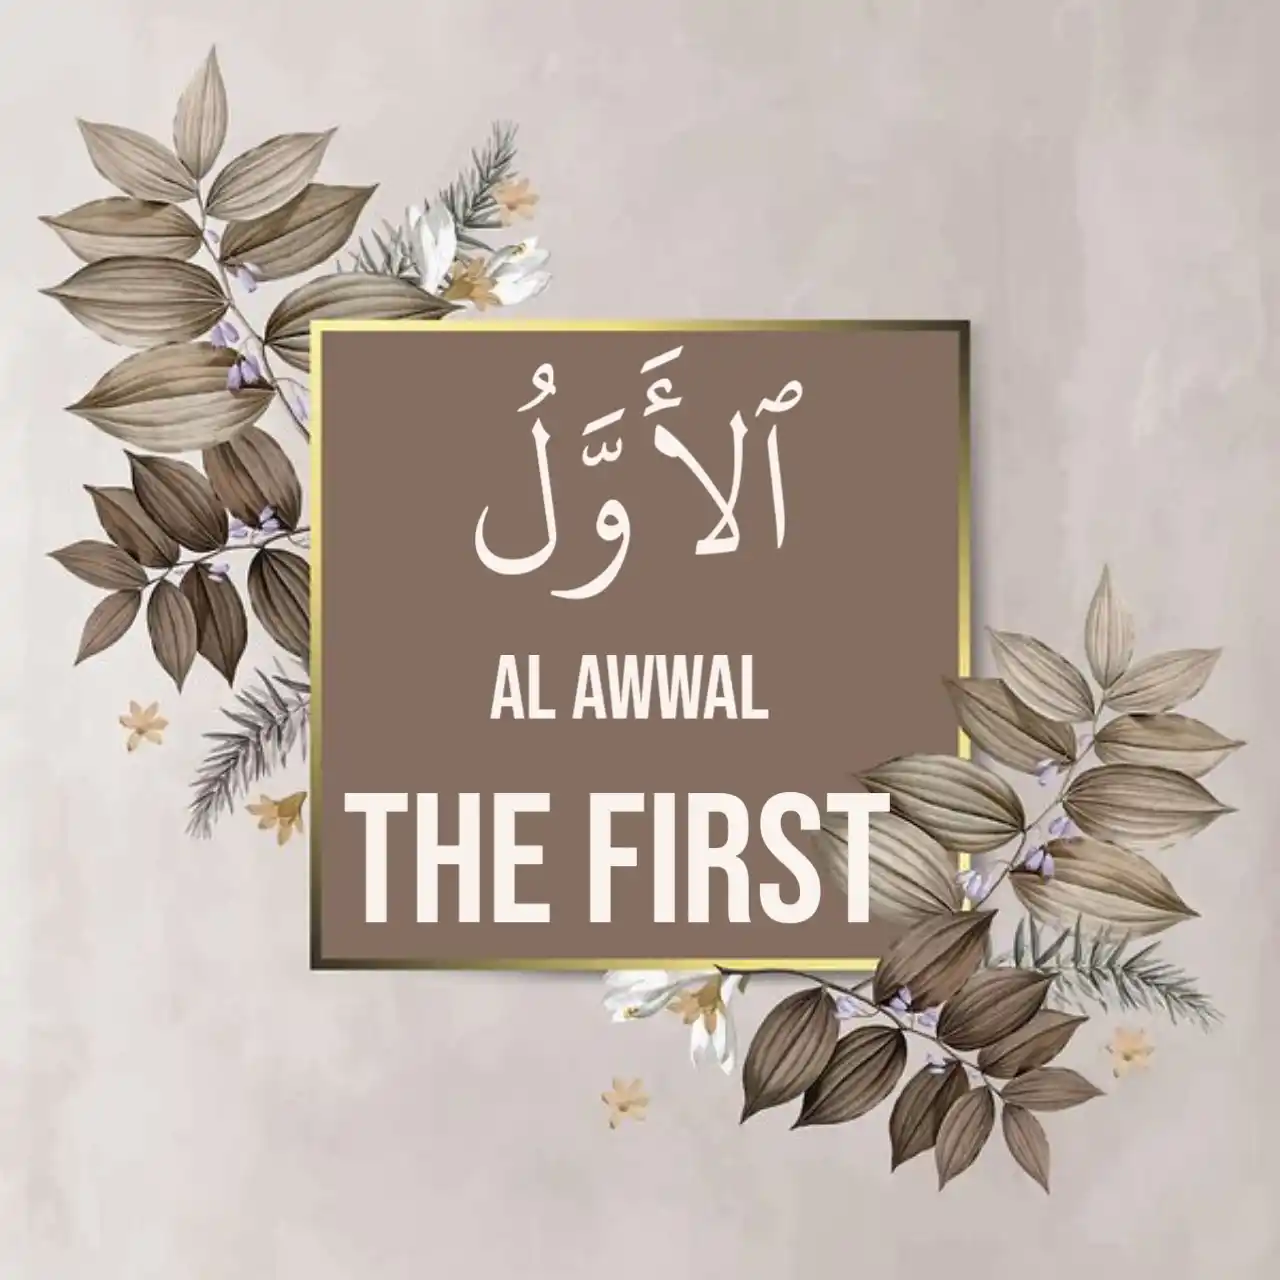 Al Awwal Meaning